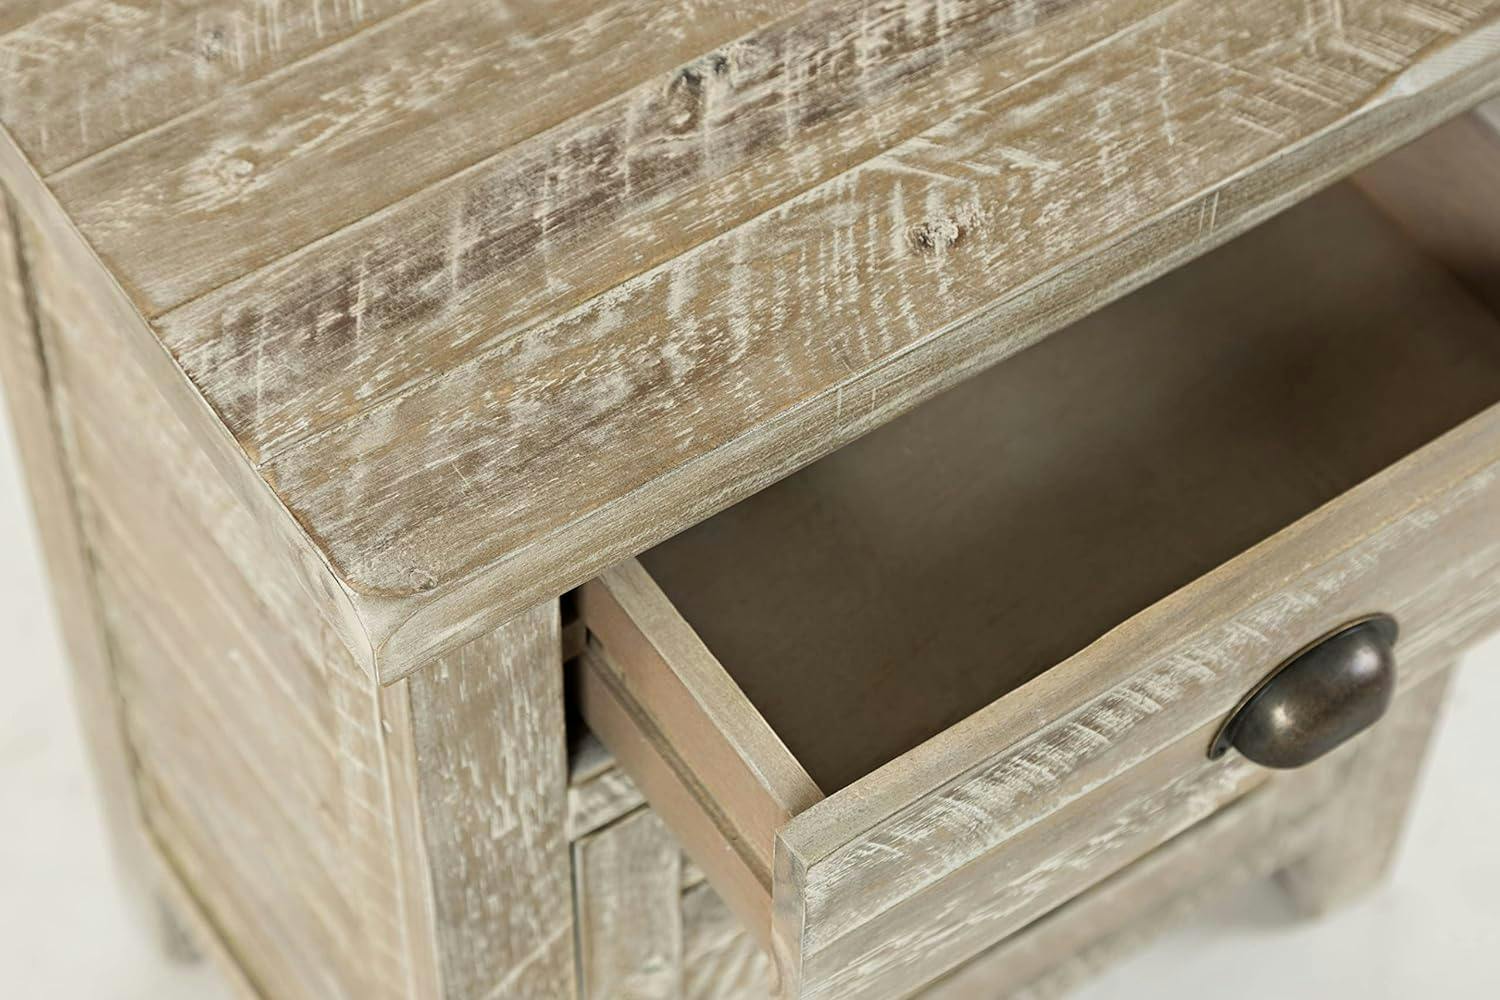 Rustic Grayson Wood Accent Table with Storage Drawer